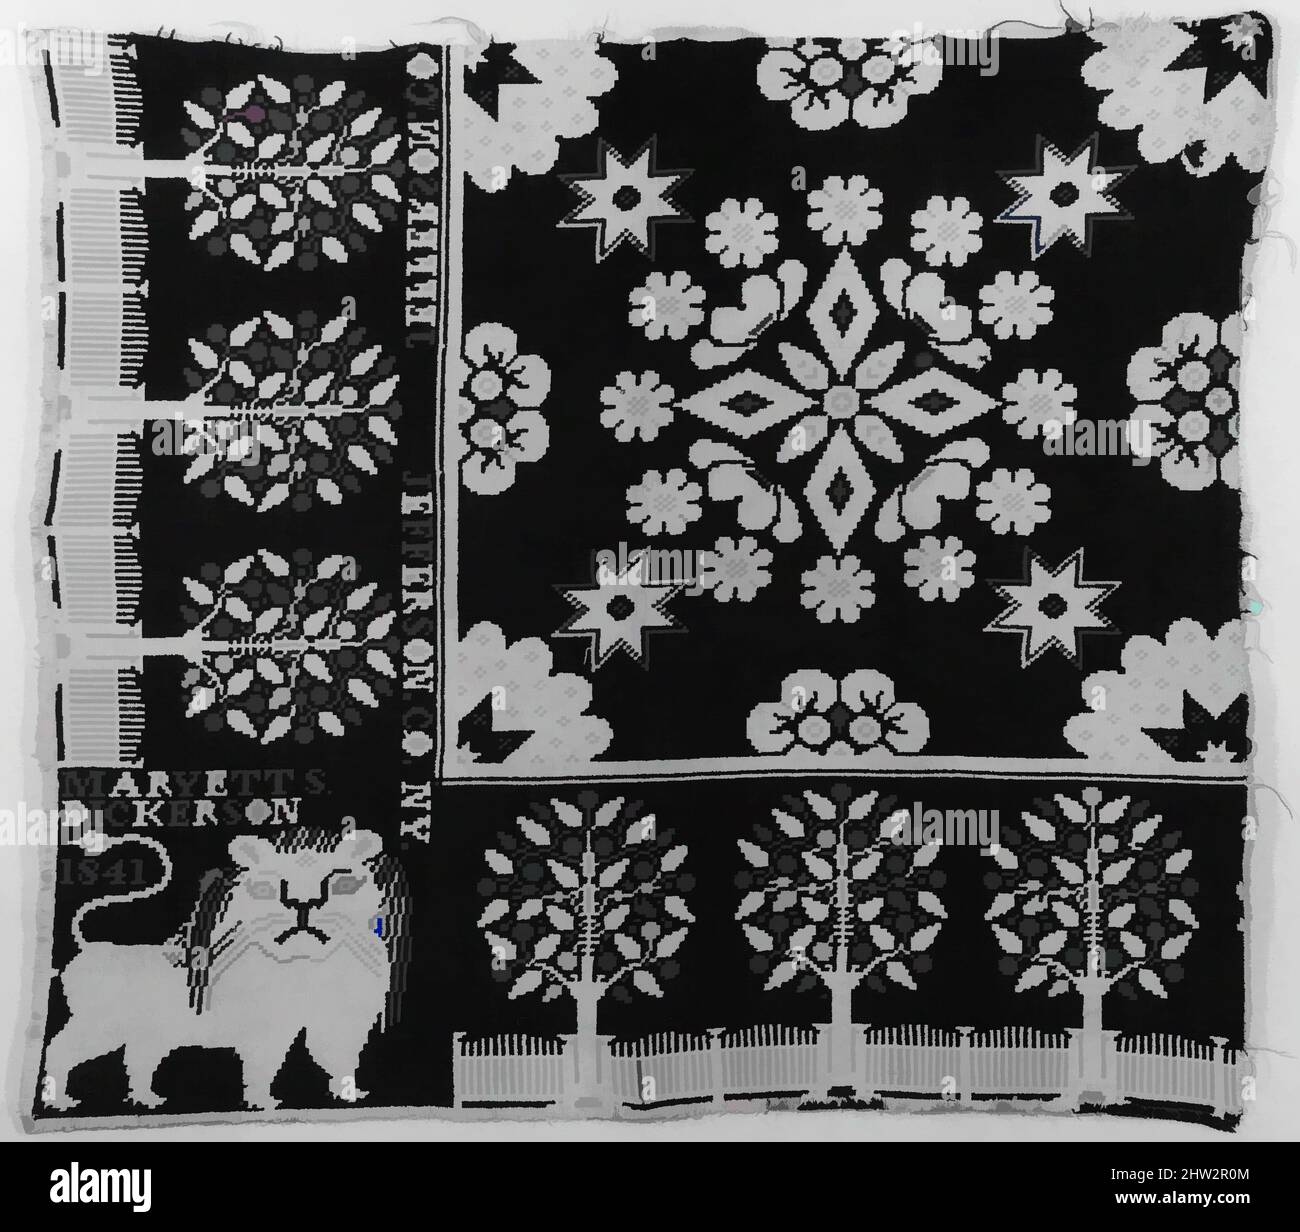 Art inspired by Woven coverlet fragment, 1841, Made in Jefferson County, New York, American, Wool and cotton; doublecloth, woven on a hand-loom with a Jacquard attachment, 32 1/2 x 29 in. (82.6 x 73.7 cm), Textiles, Harry Tyler (1801–1858, Classic works modernized by Artotop with a splash of modernity. Shapes, color and value, eye-catching visual impact on art. Emotions through freedom of artworks in a contemporary way. A timeless message pursuing a wildly creative new direction. Artists turning to the digital medium and creating the Artotop NFT Stock Photo